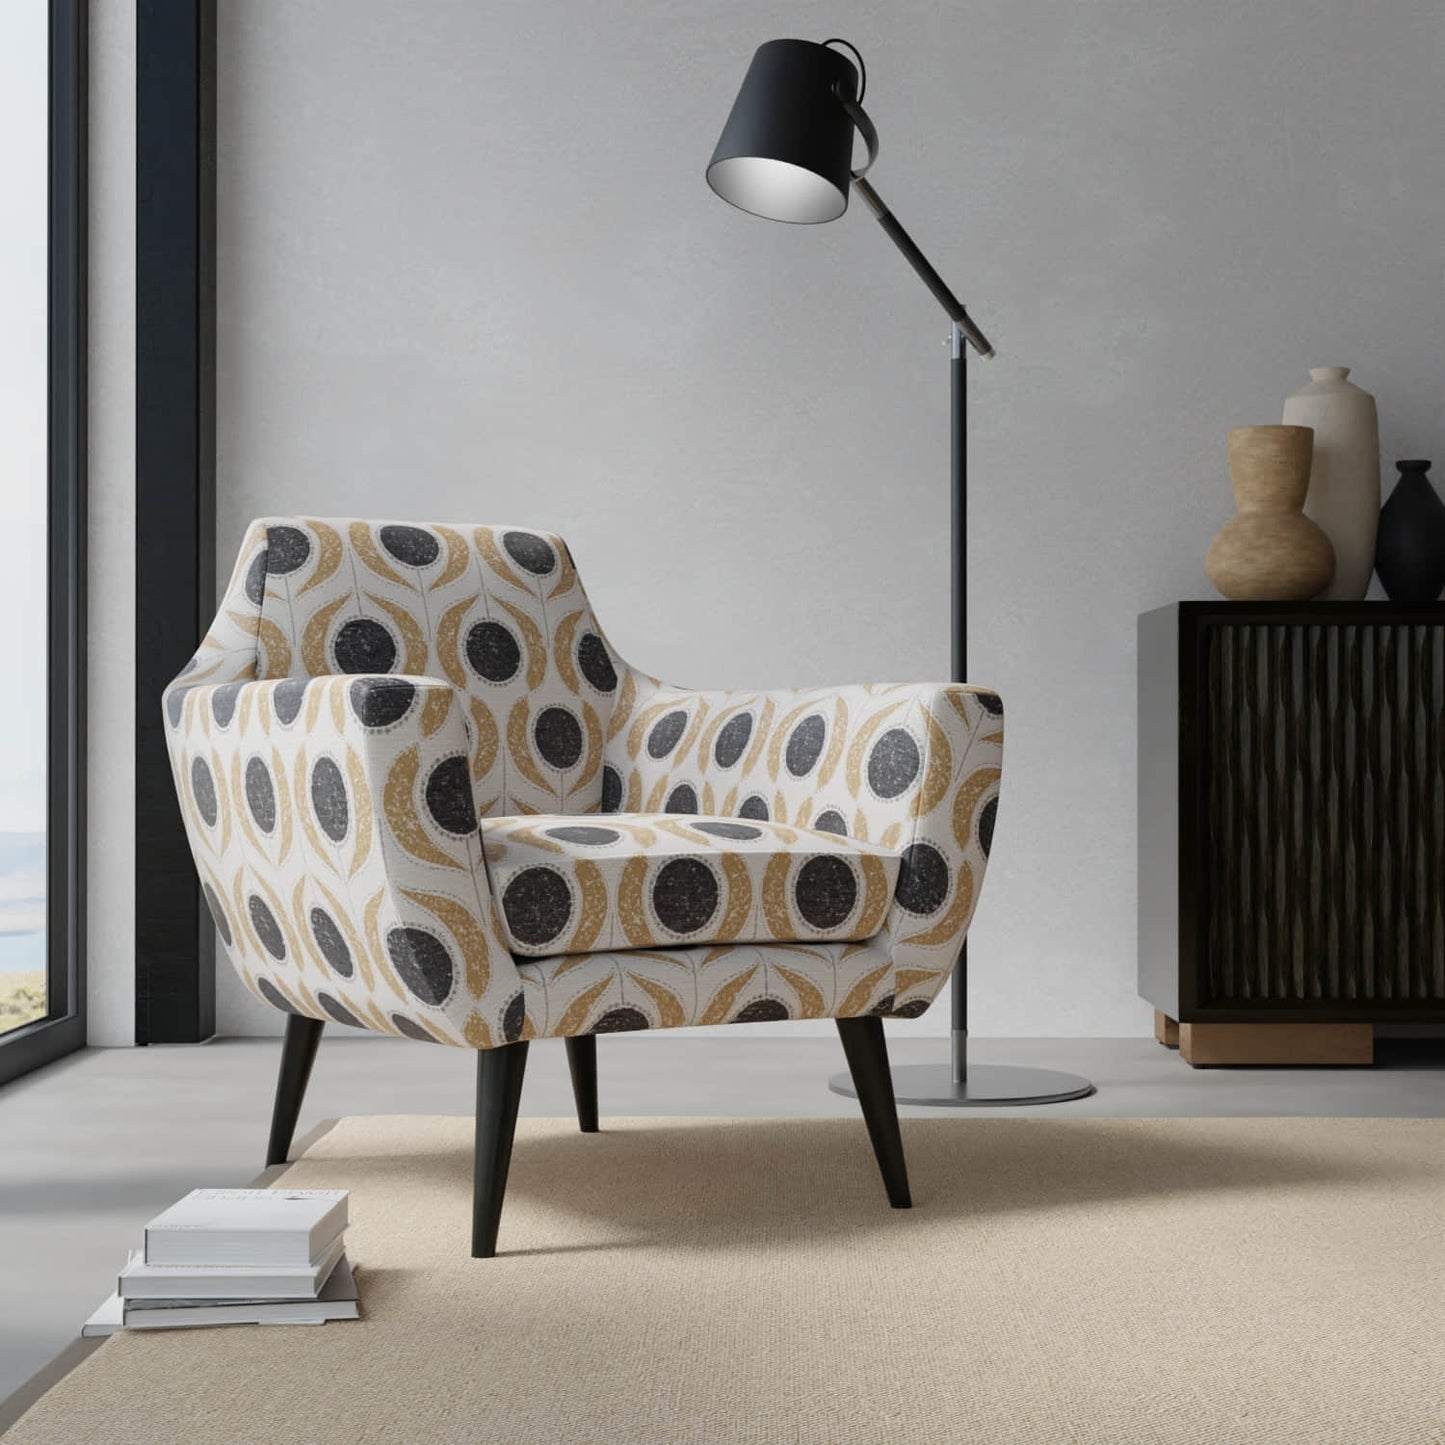 Odom Zinc upholstered on a contemporary chair